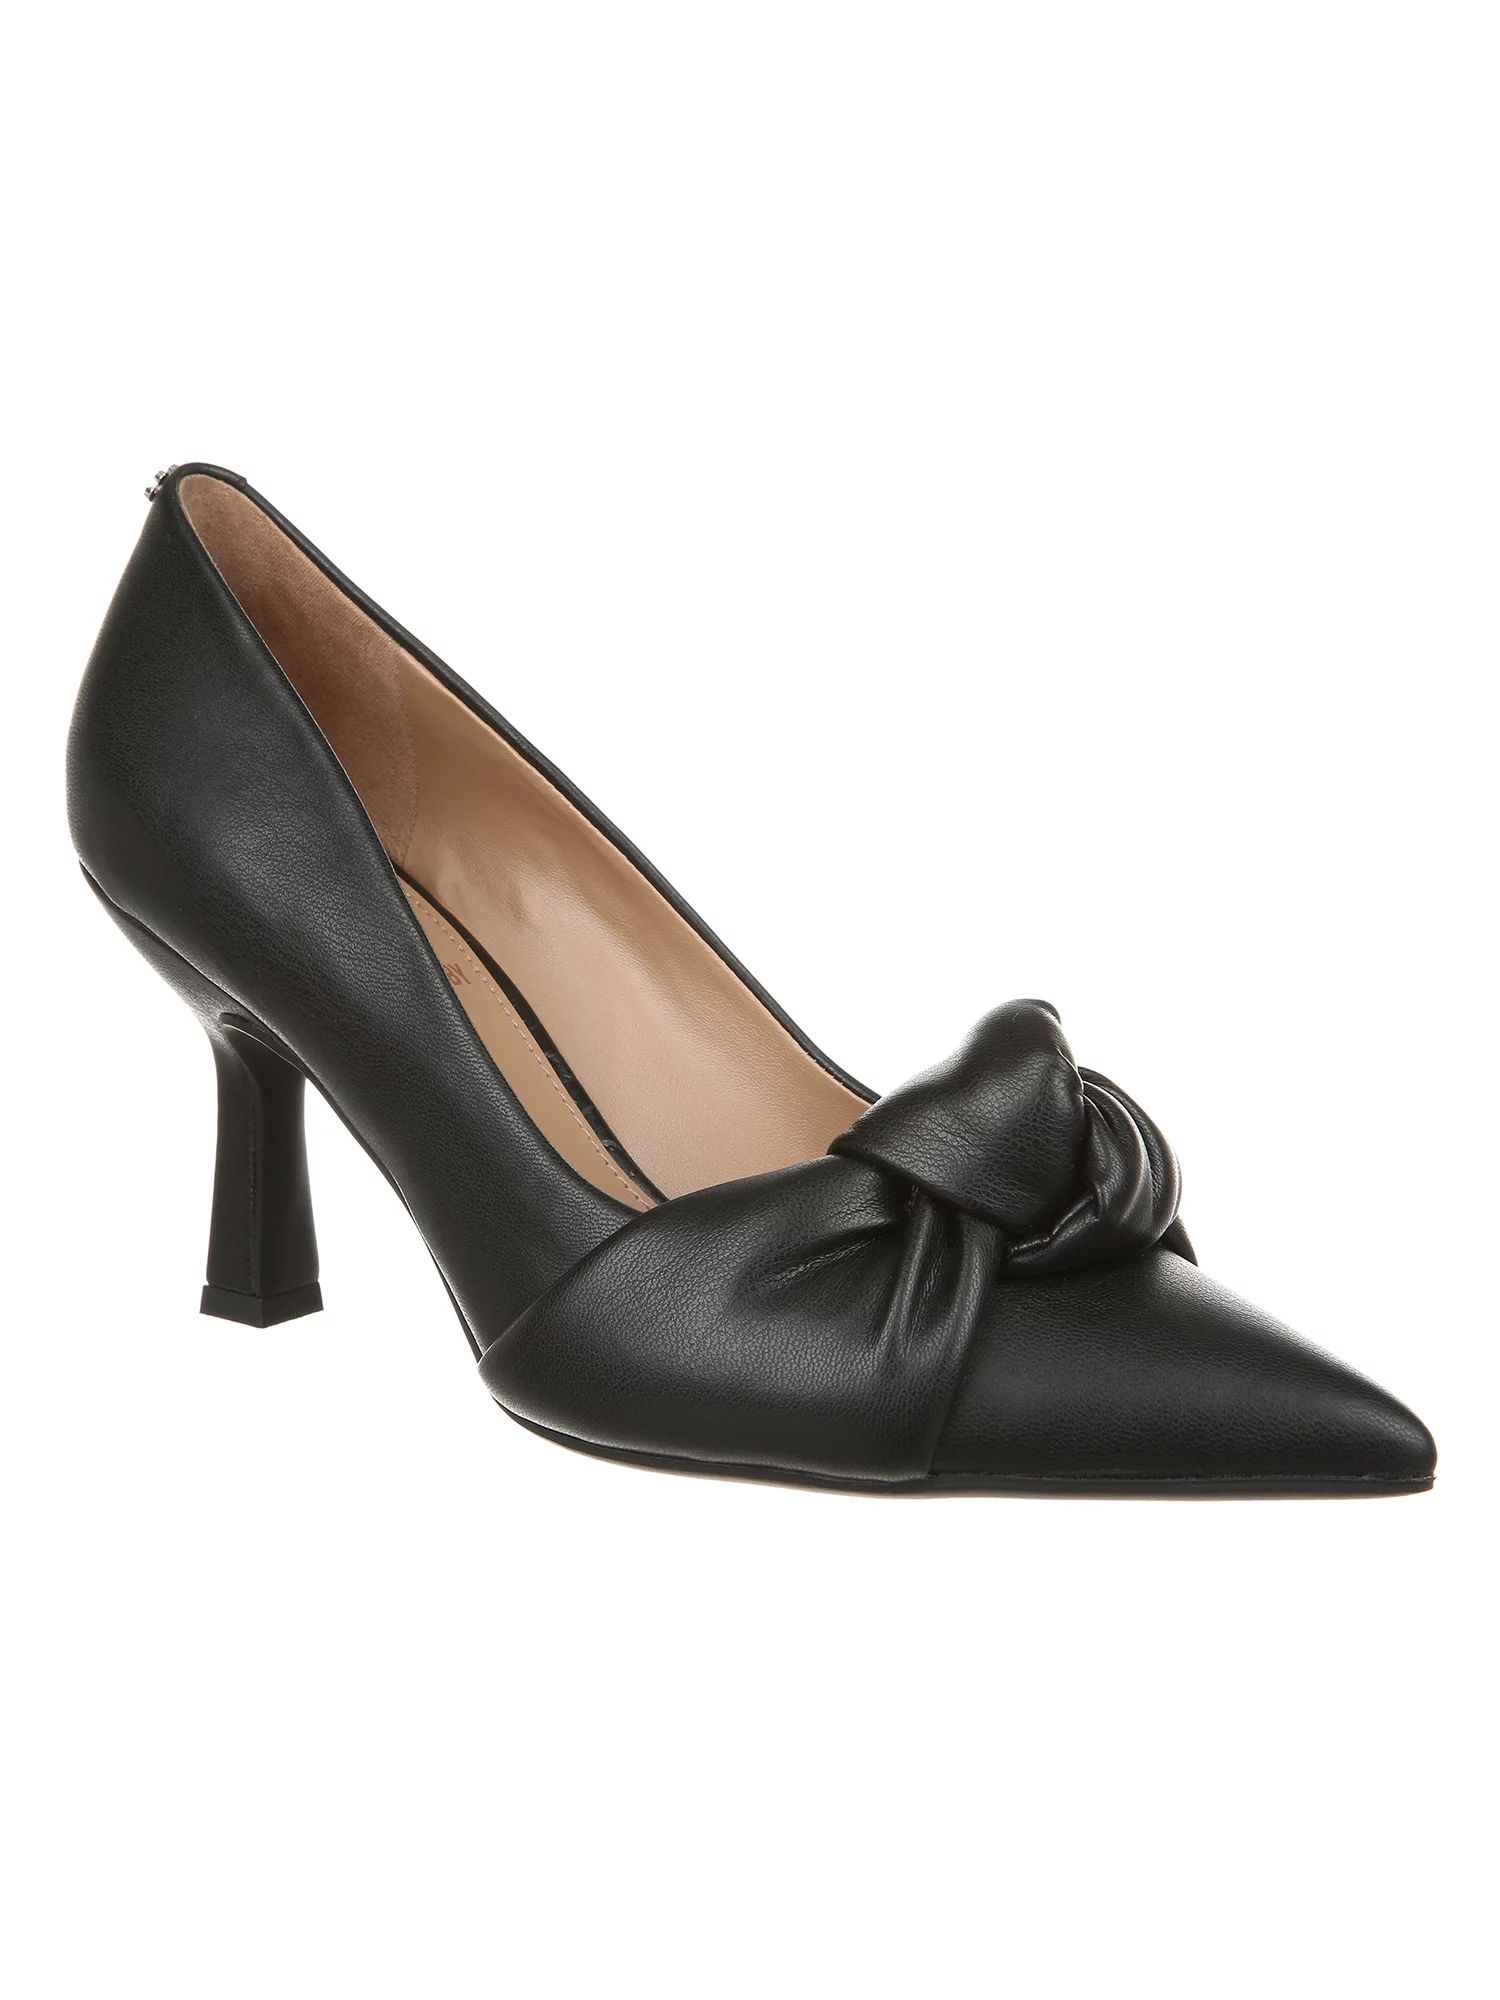 Sam & Libby Women's Wren Knotted Pointed Toe Pump | Walmart (US)